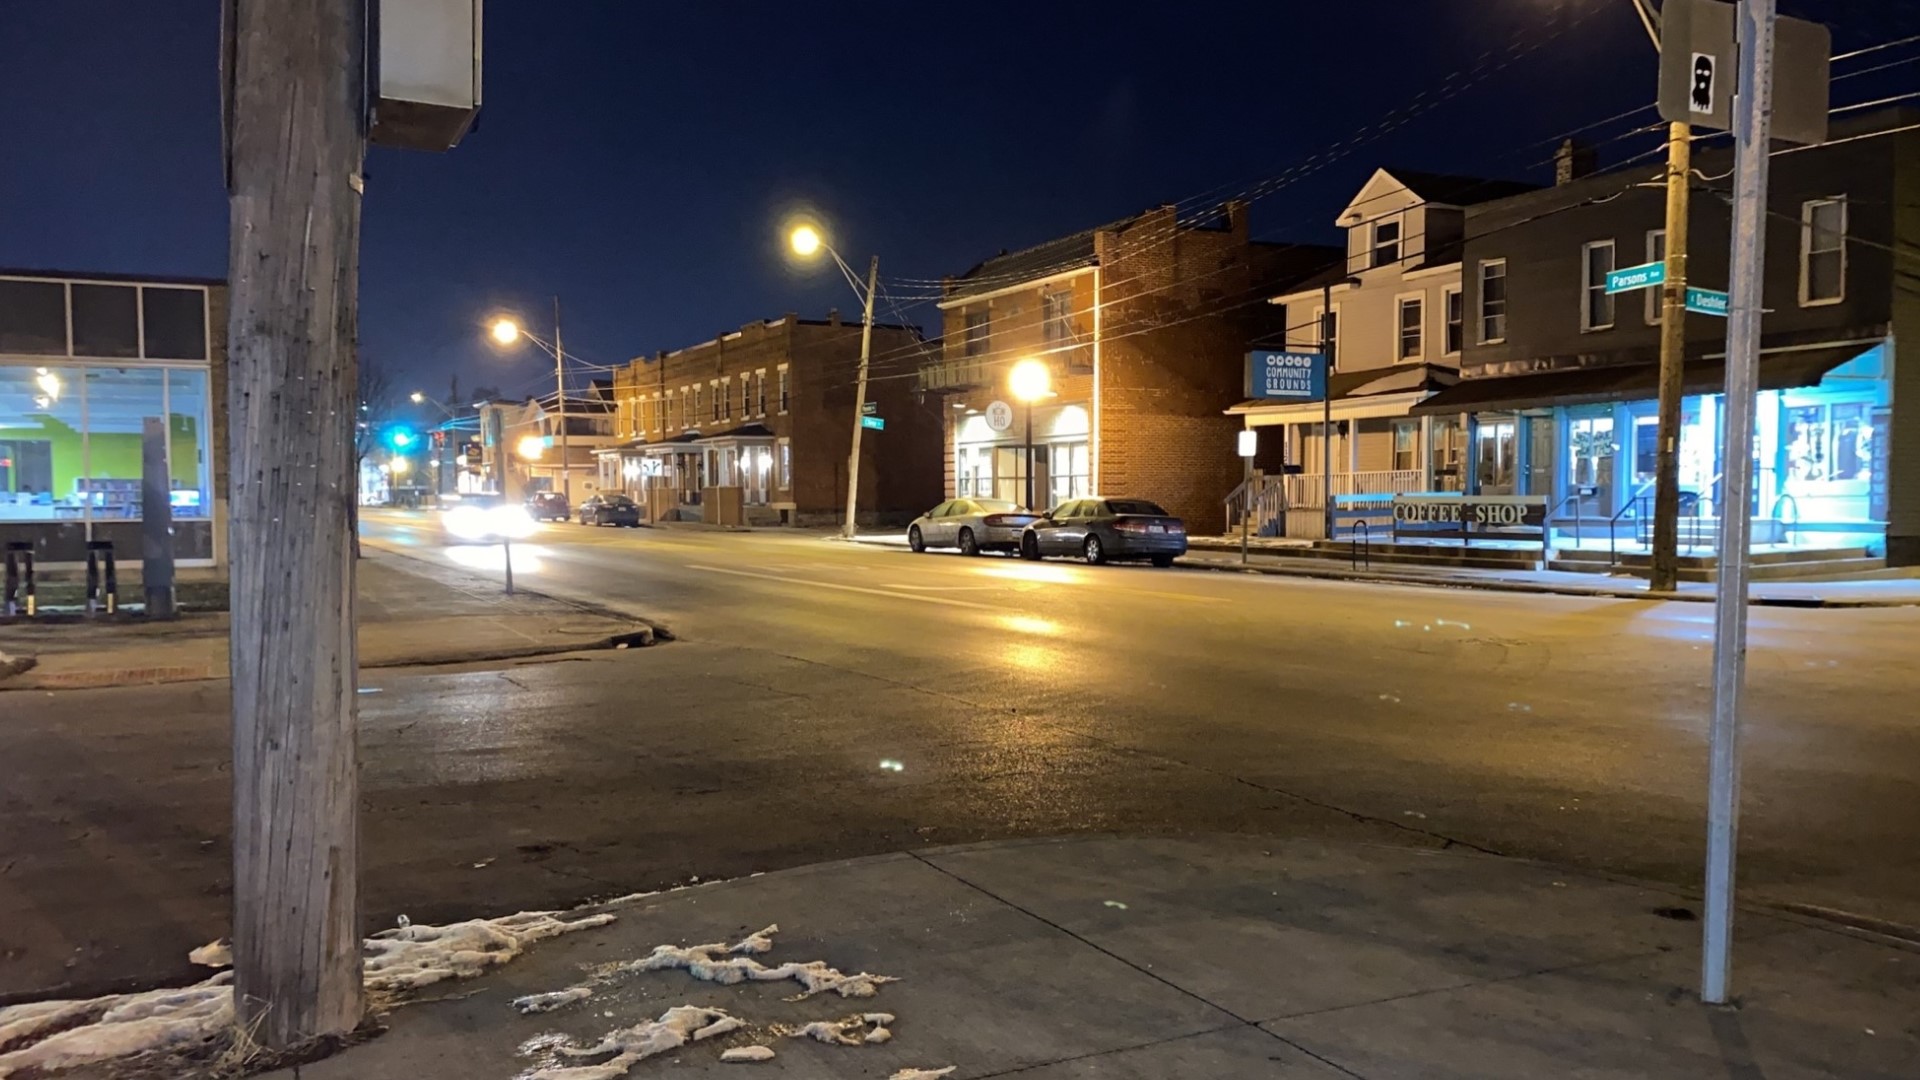 The shooting happened on Deshler Avenue and Parsons Avenue near South High School at 12:55 a.m., Columbus police said.